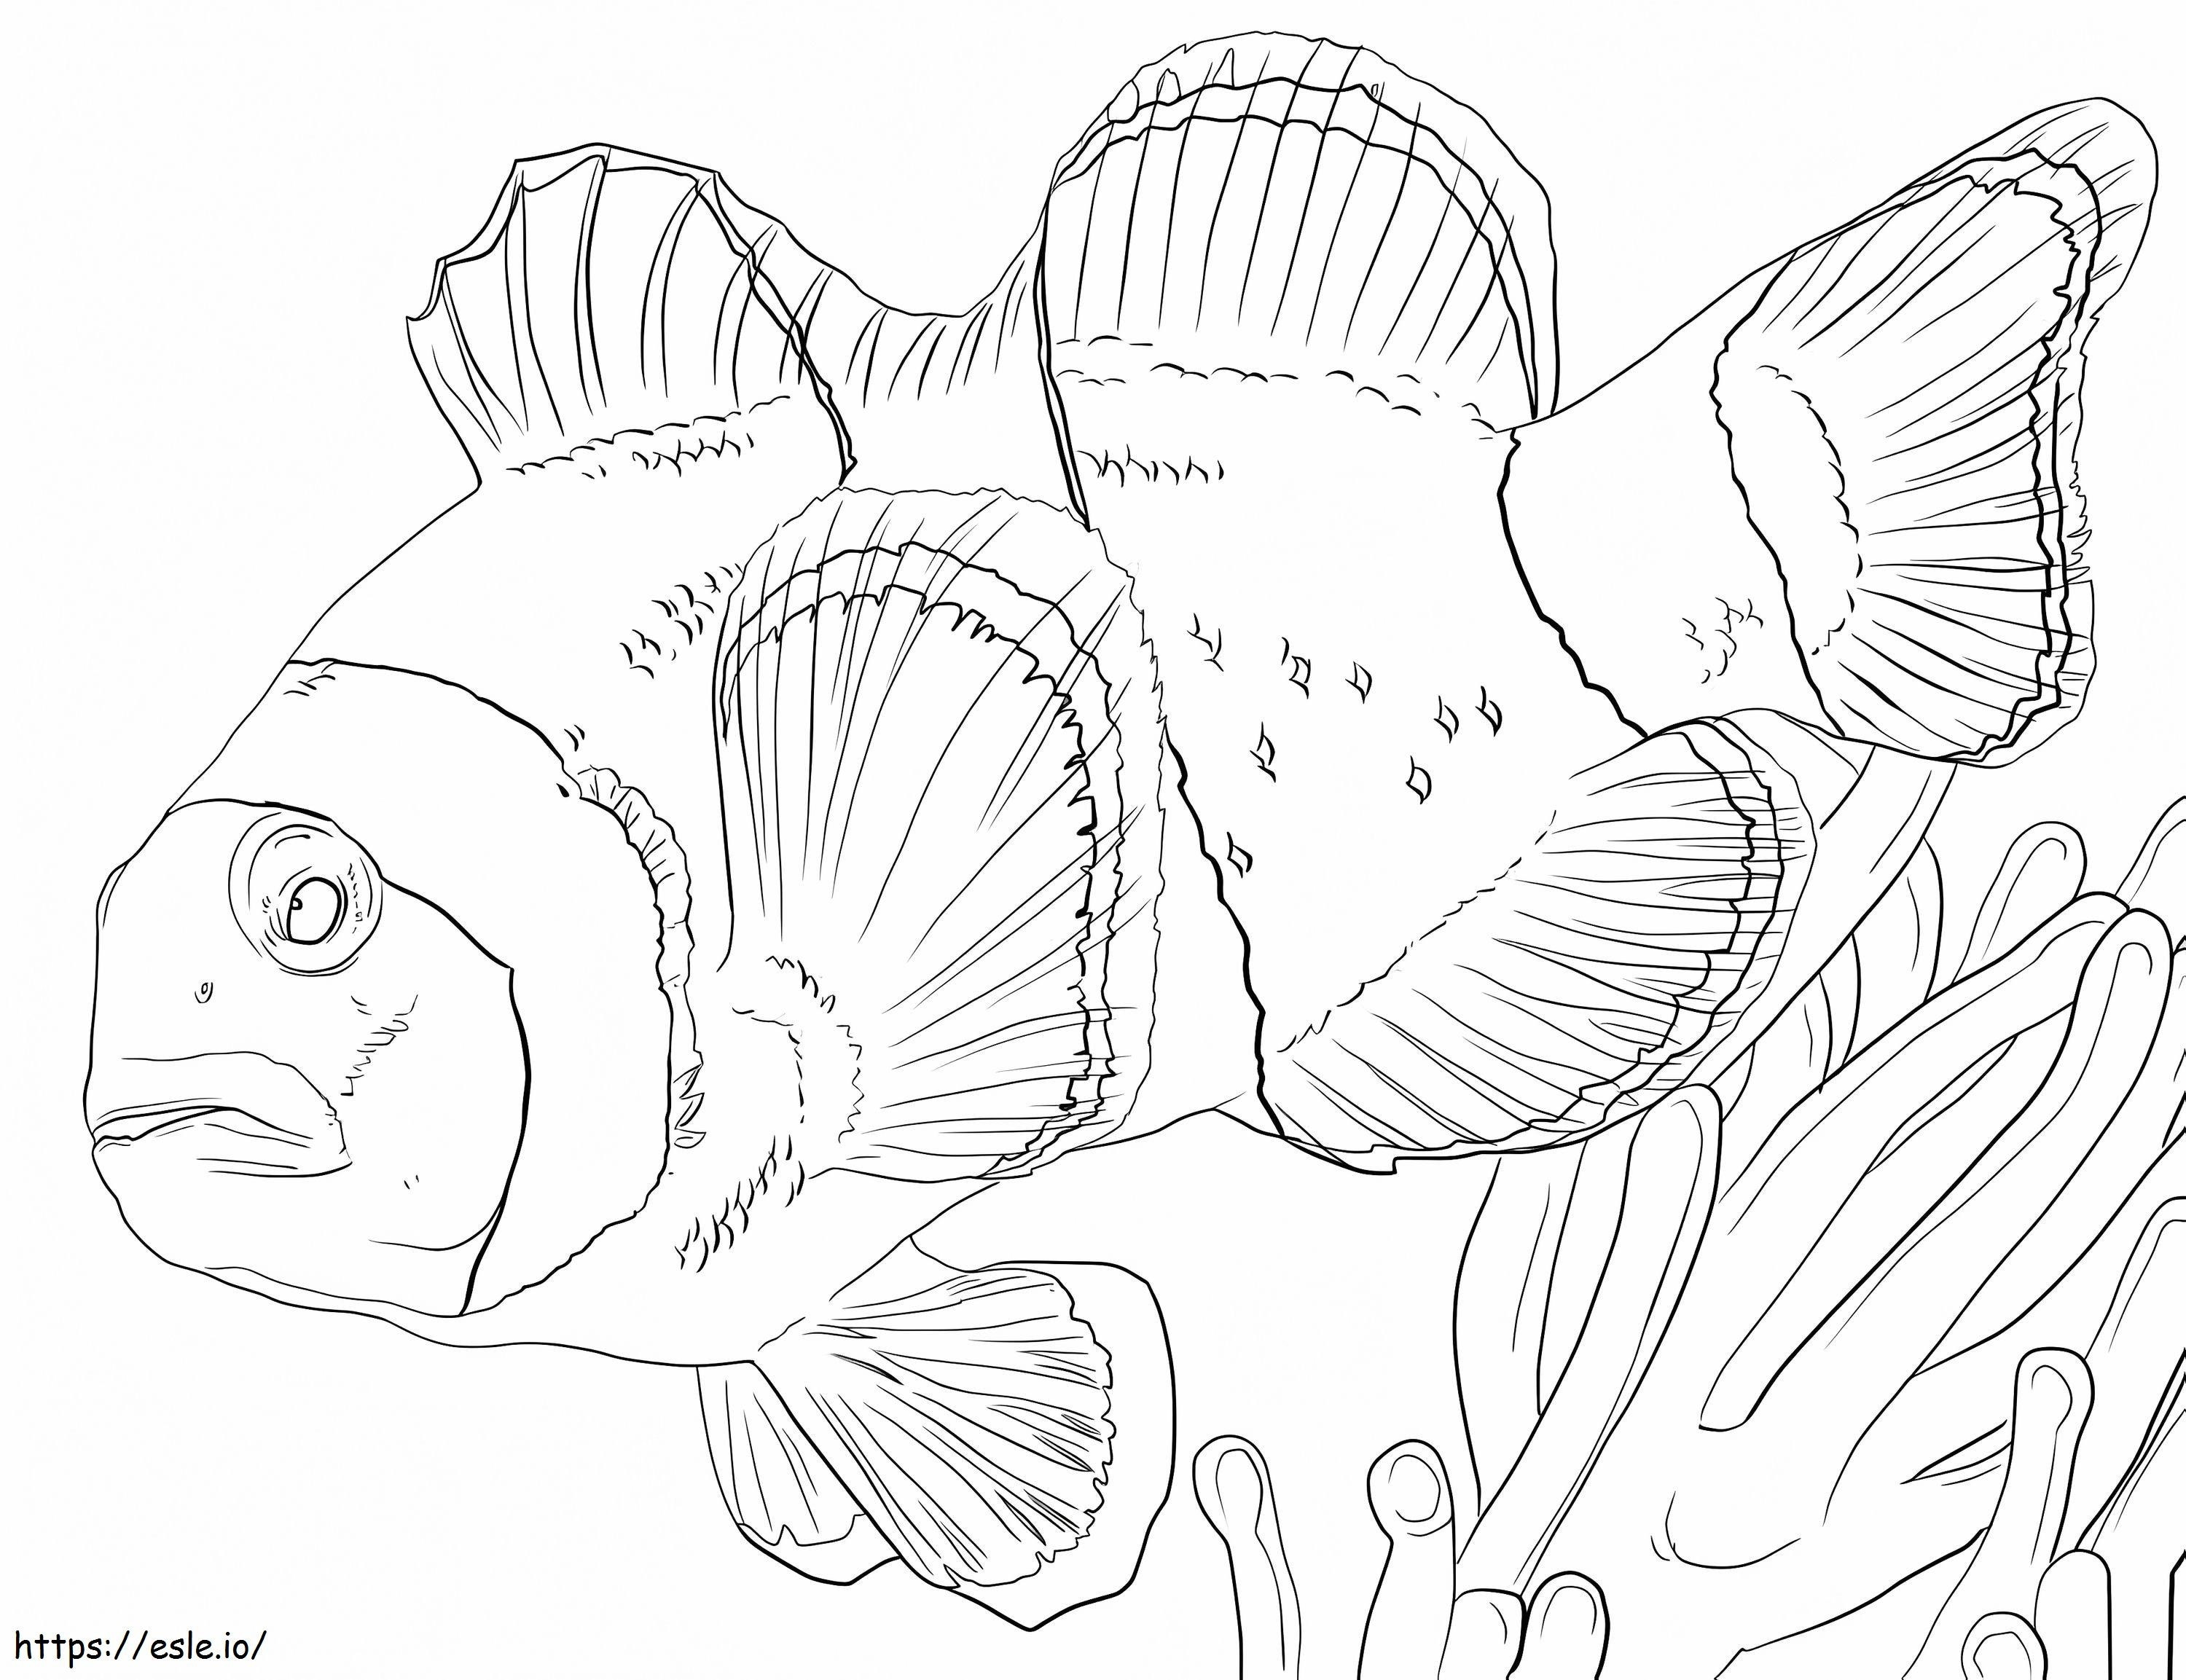 Clown Anemonefish 1 coloring page